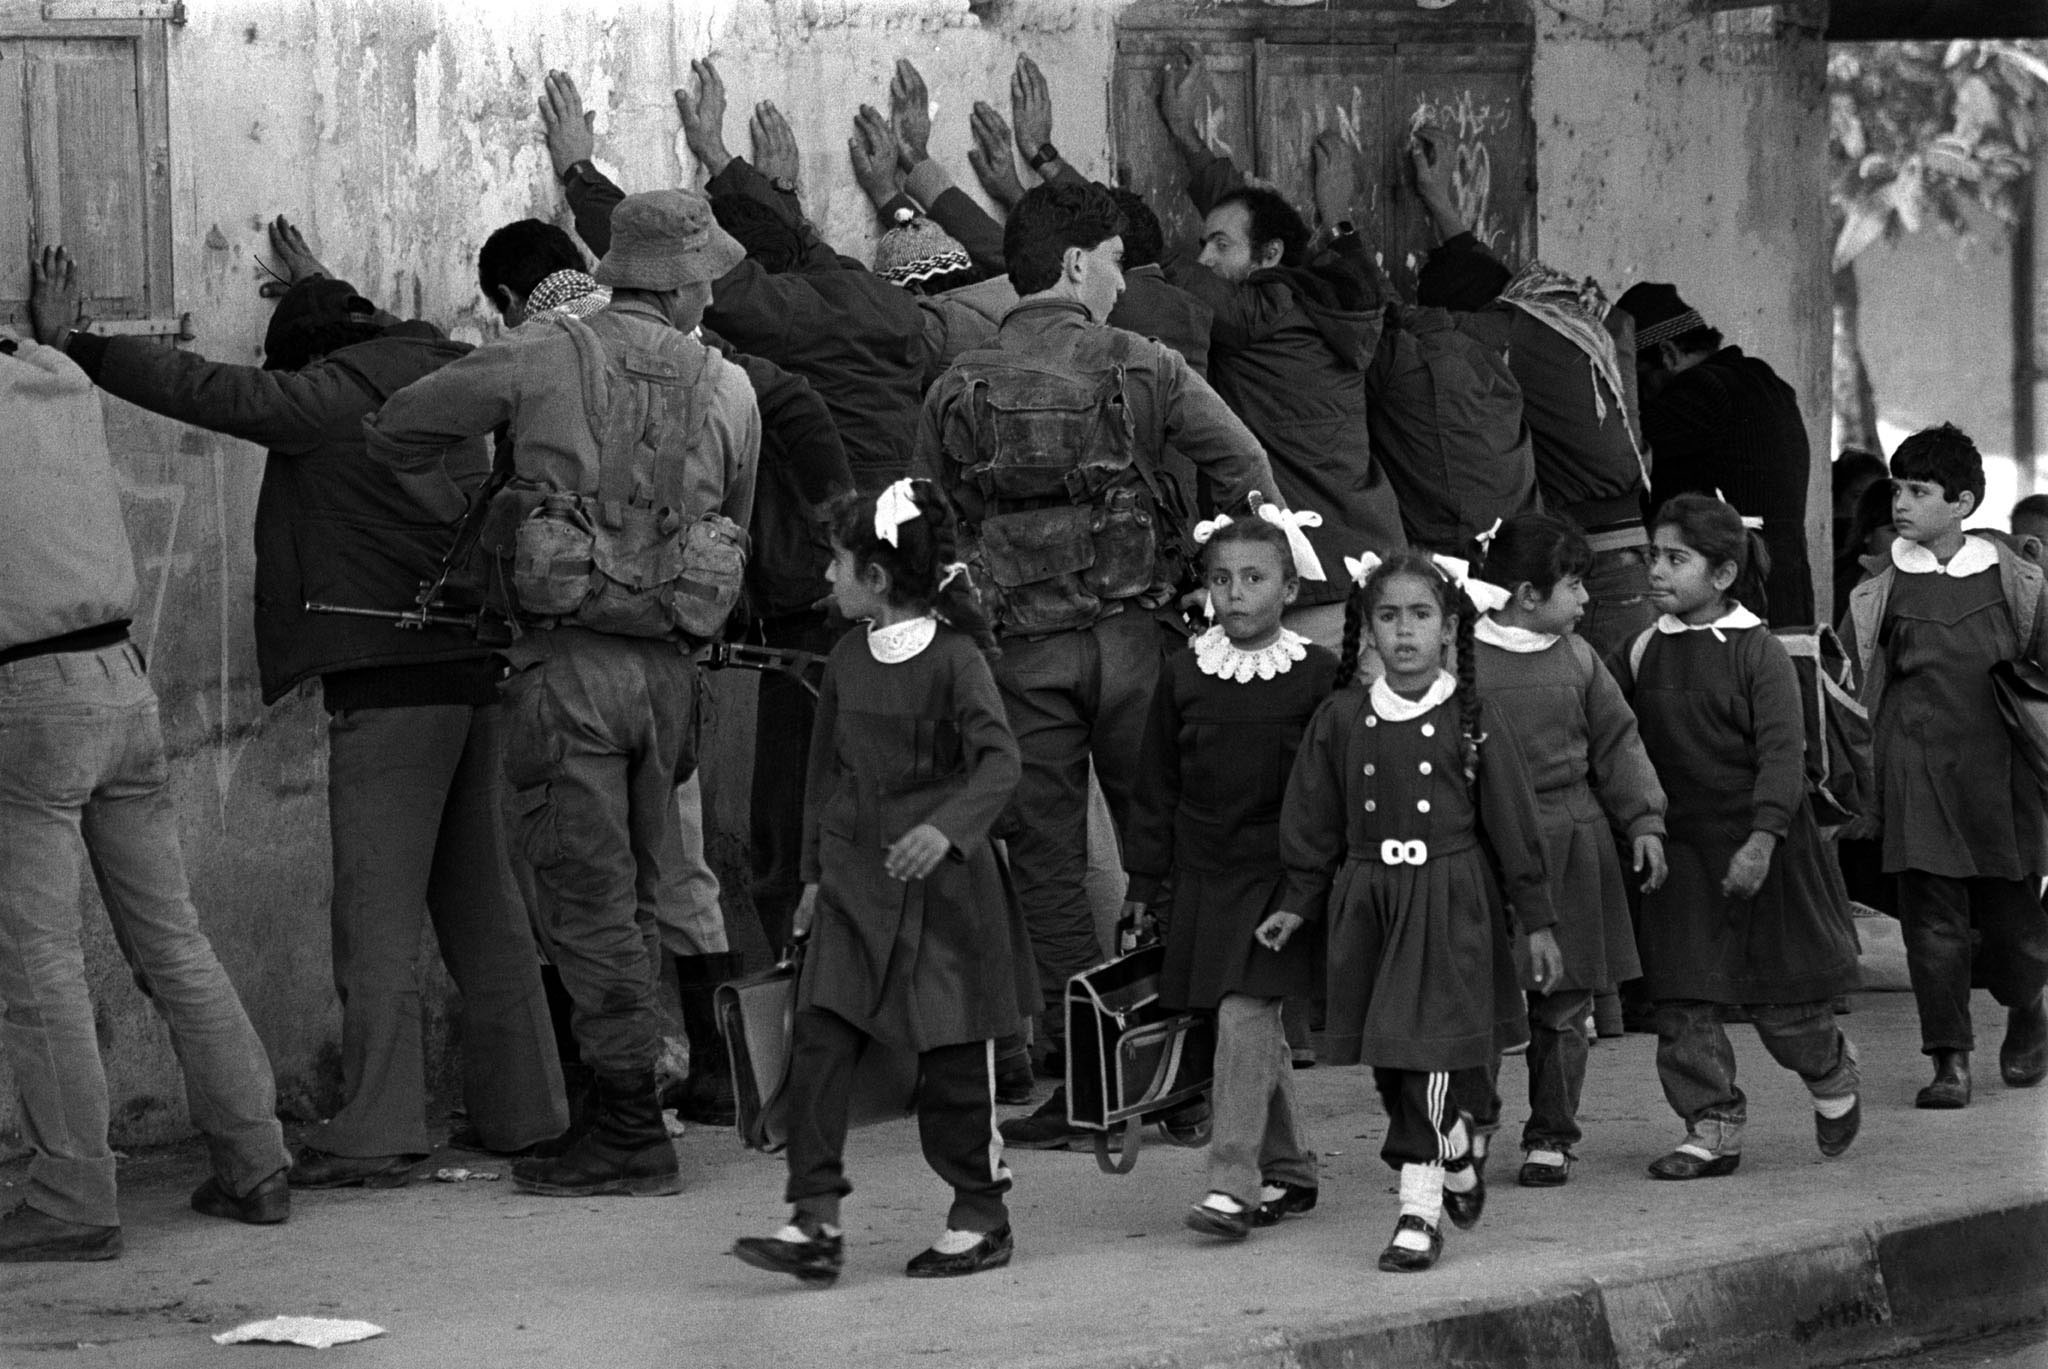 Palestinian school girls returning home from classes pass a line of Arab men being frisked by Israeli soldiers in the Gaza Strip in 1986 after a Jewish man was stabbed and seriously injured.  REUTERS